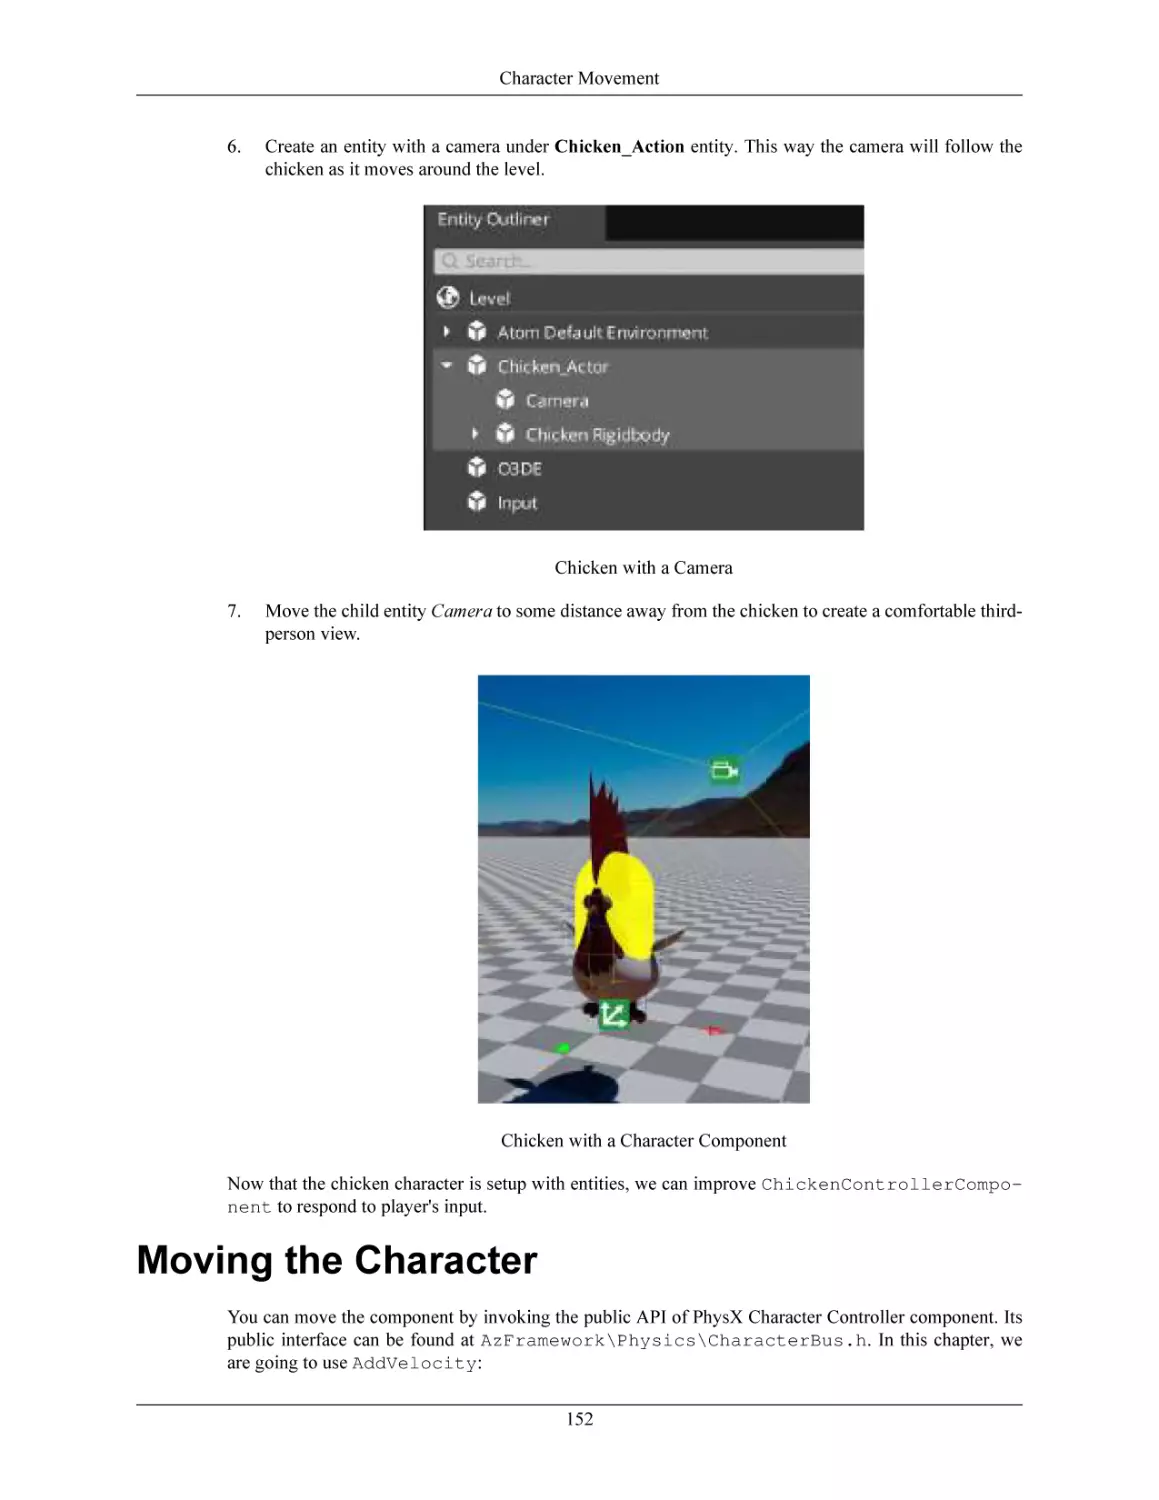 Moving the Character